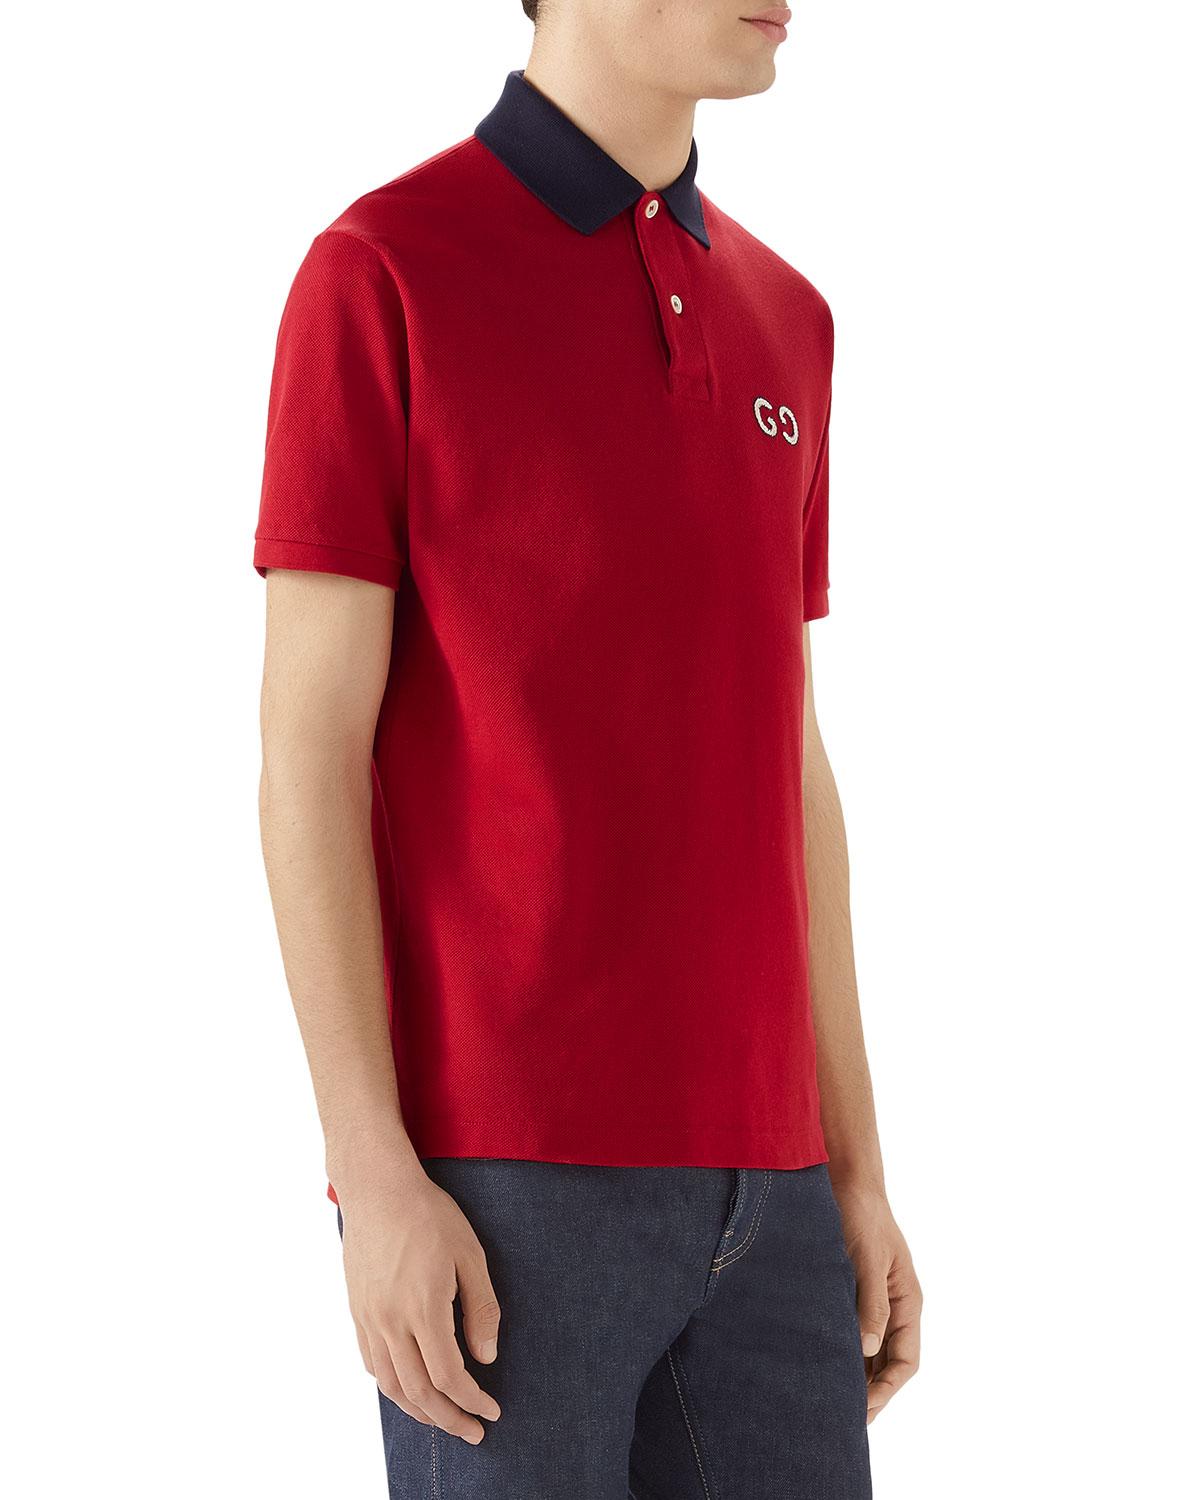 Gucci Cotton Men's Pique Polo Shirt W/ GG Patch in Blue/Red (Red) for ...